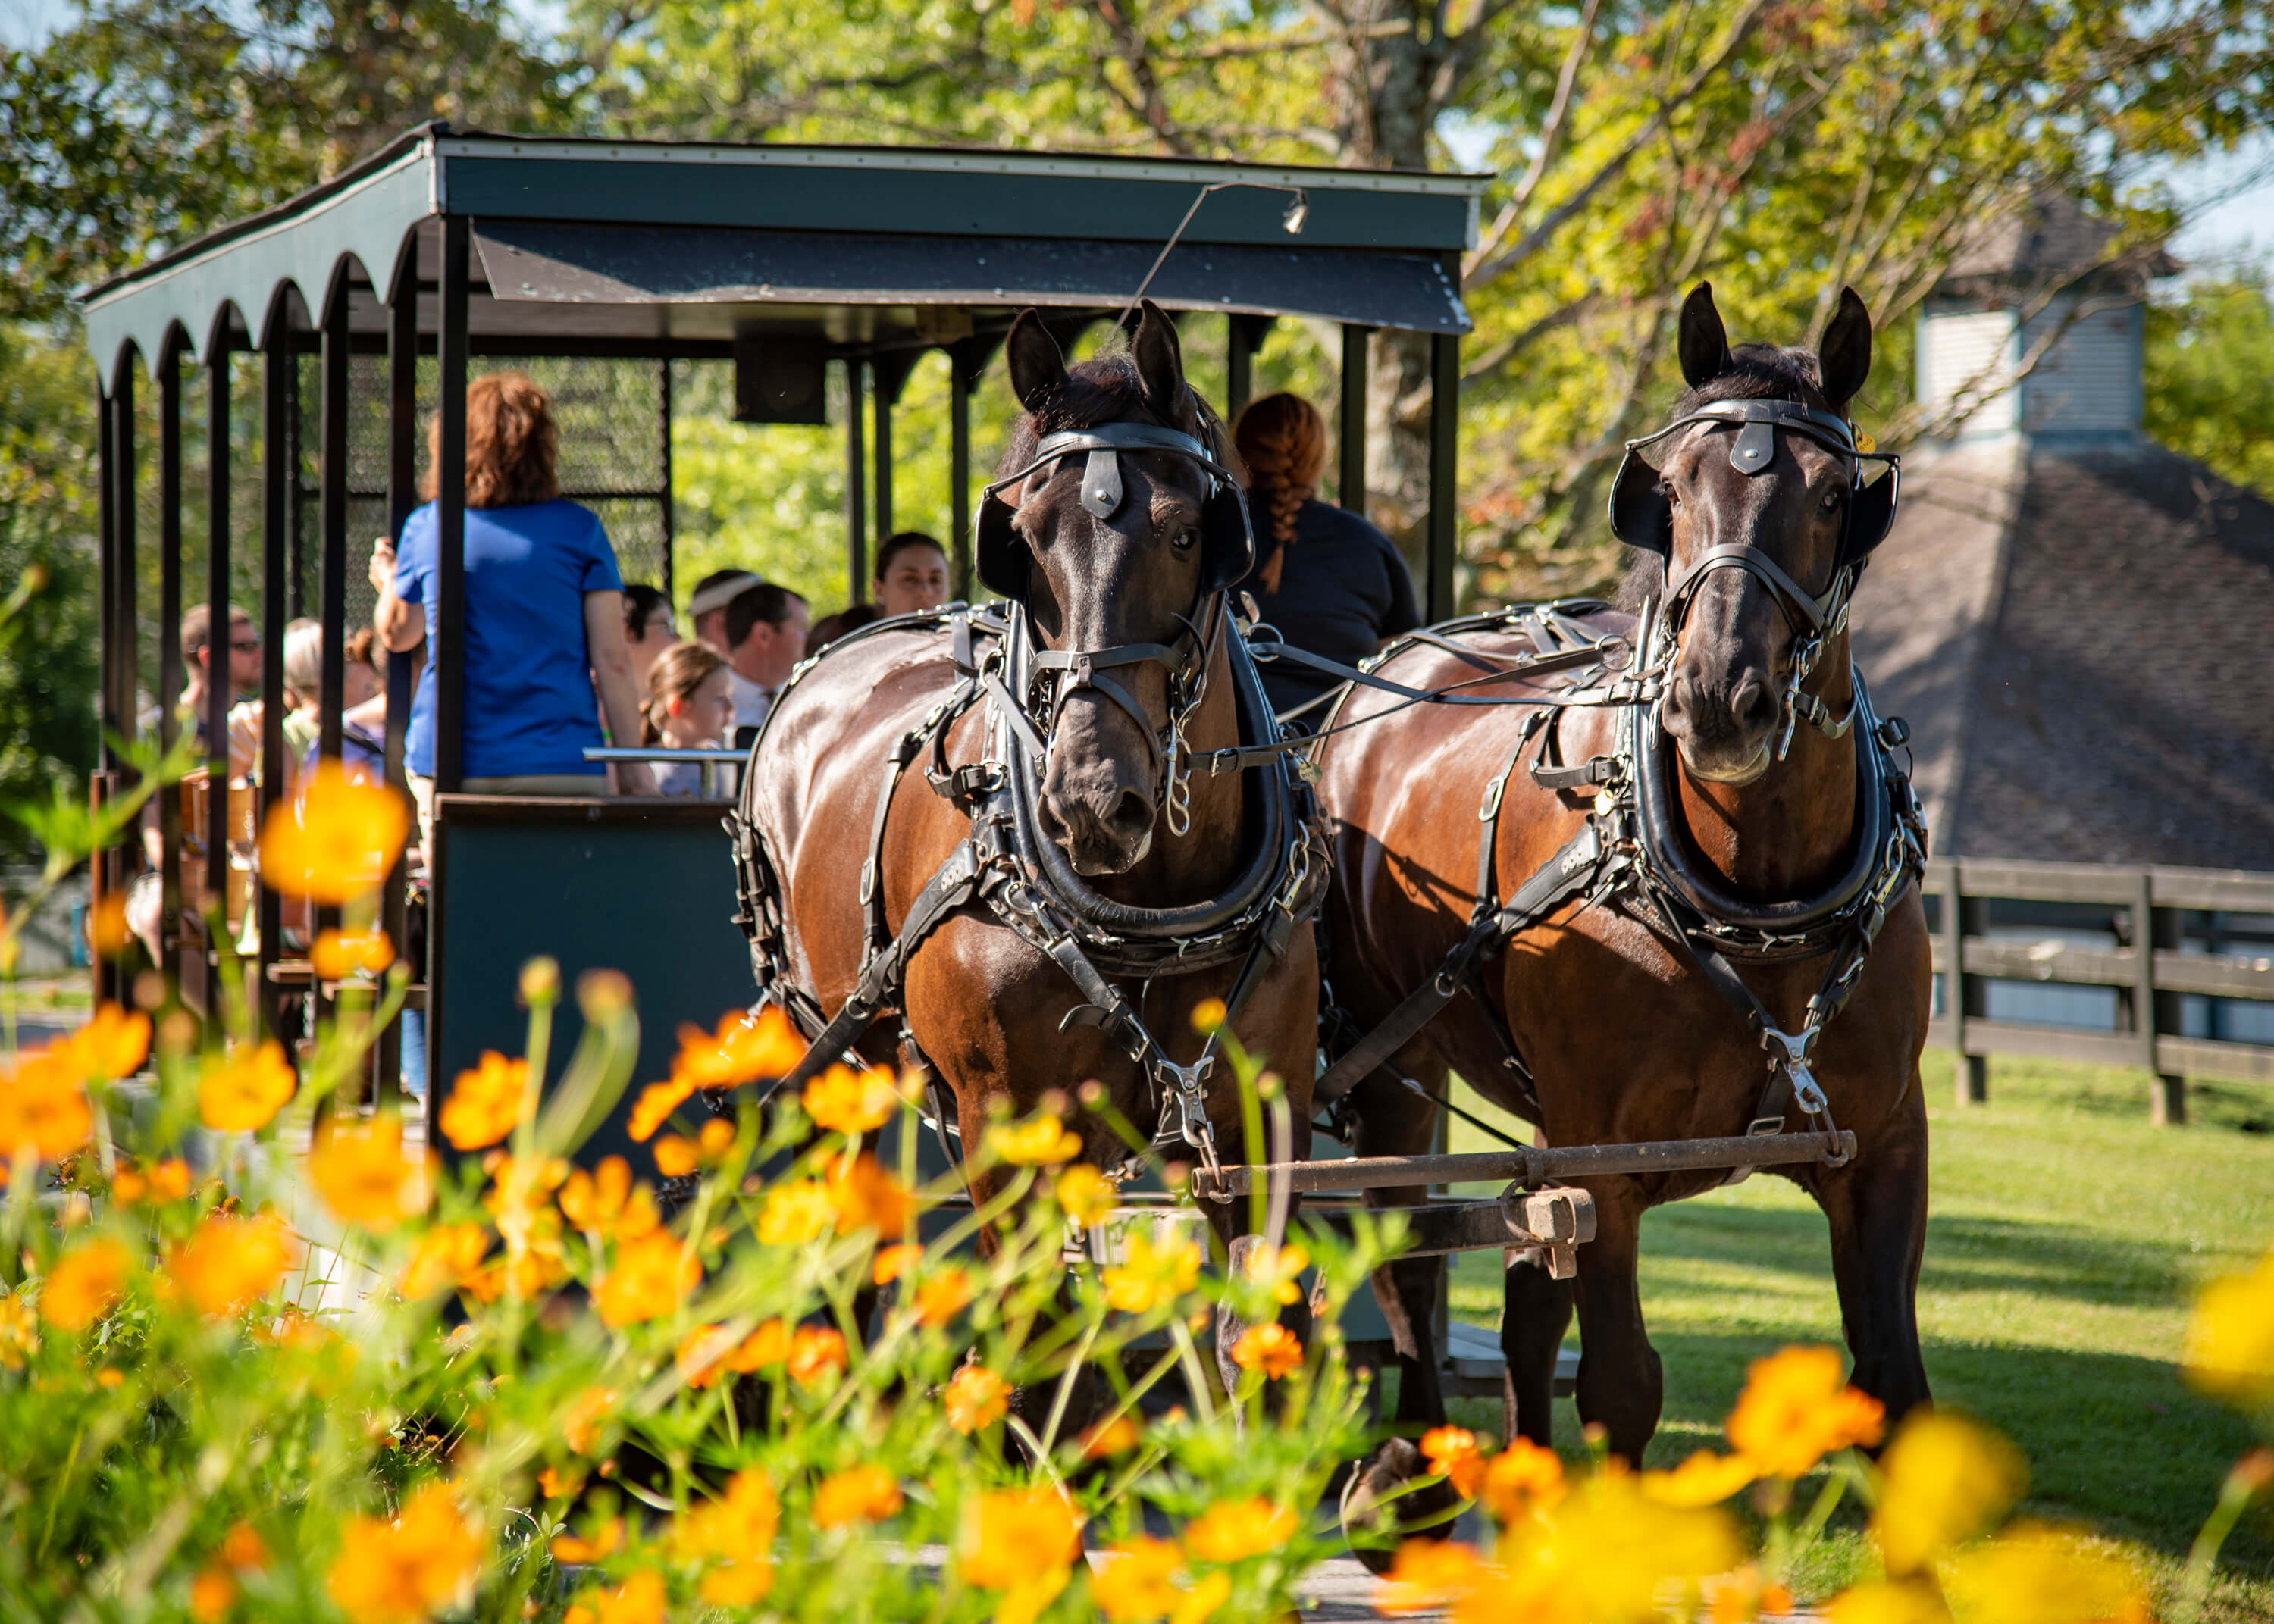 Trolly Rides at the Kentucky Horse Park